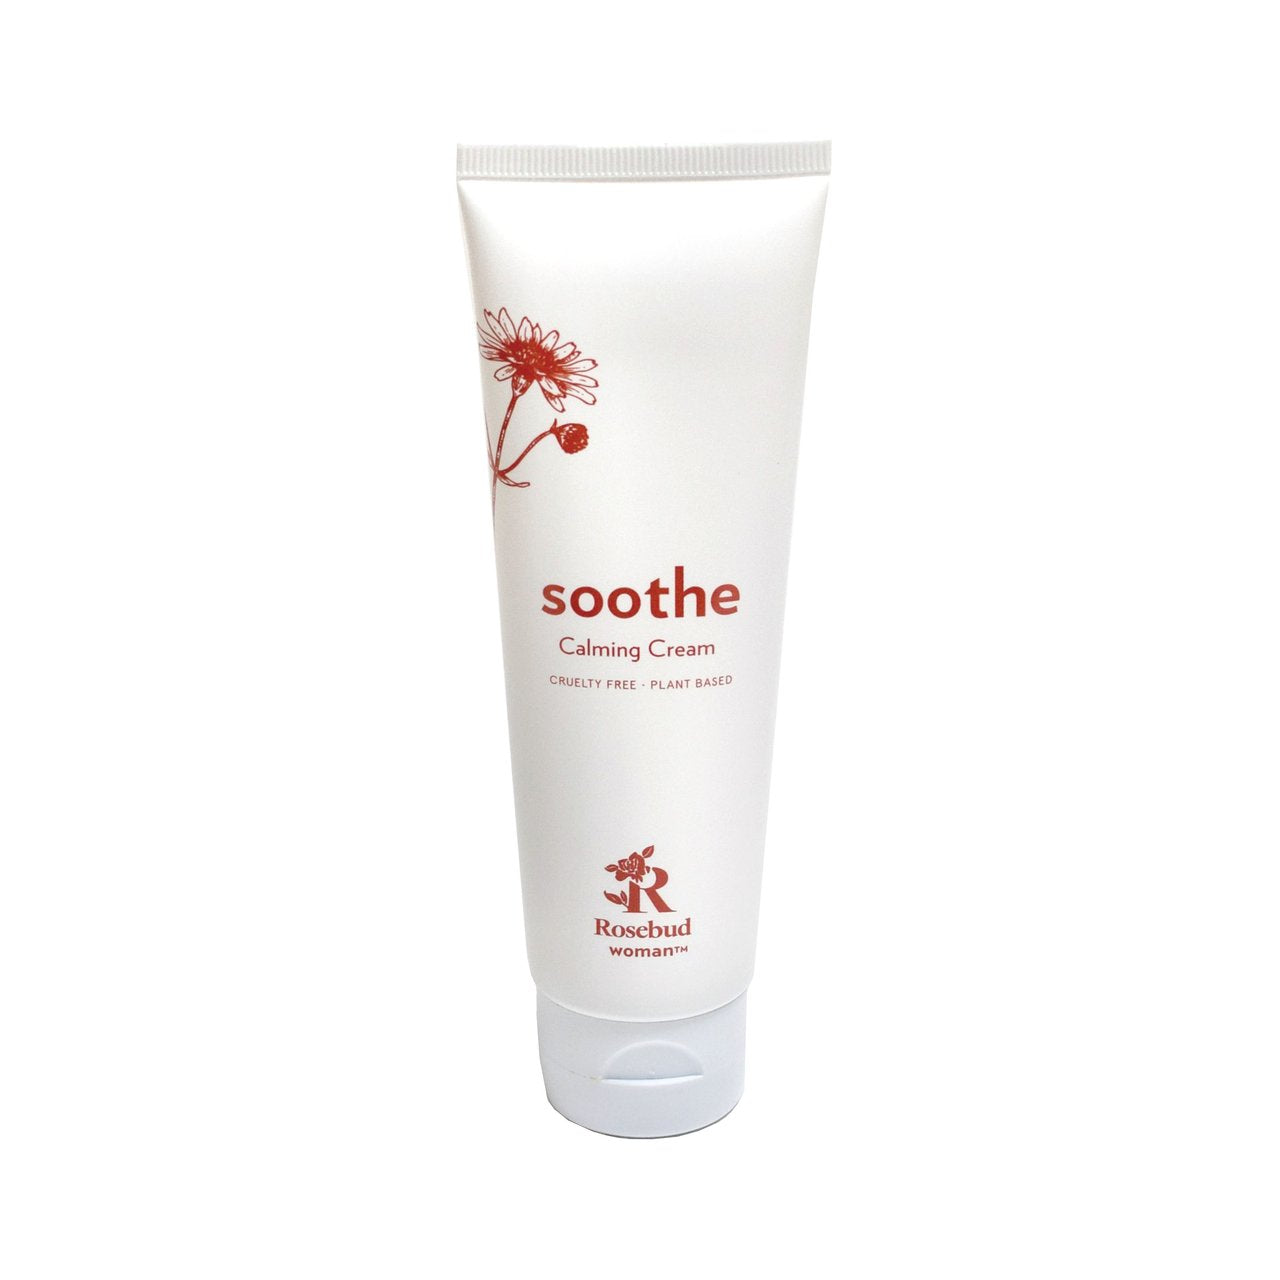 Soothe Calming Cream Extra Image 1